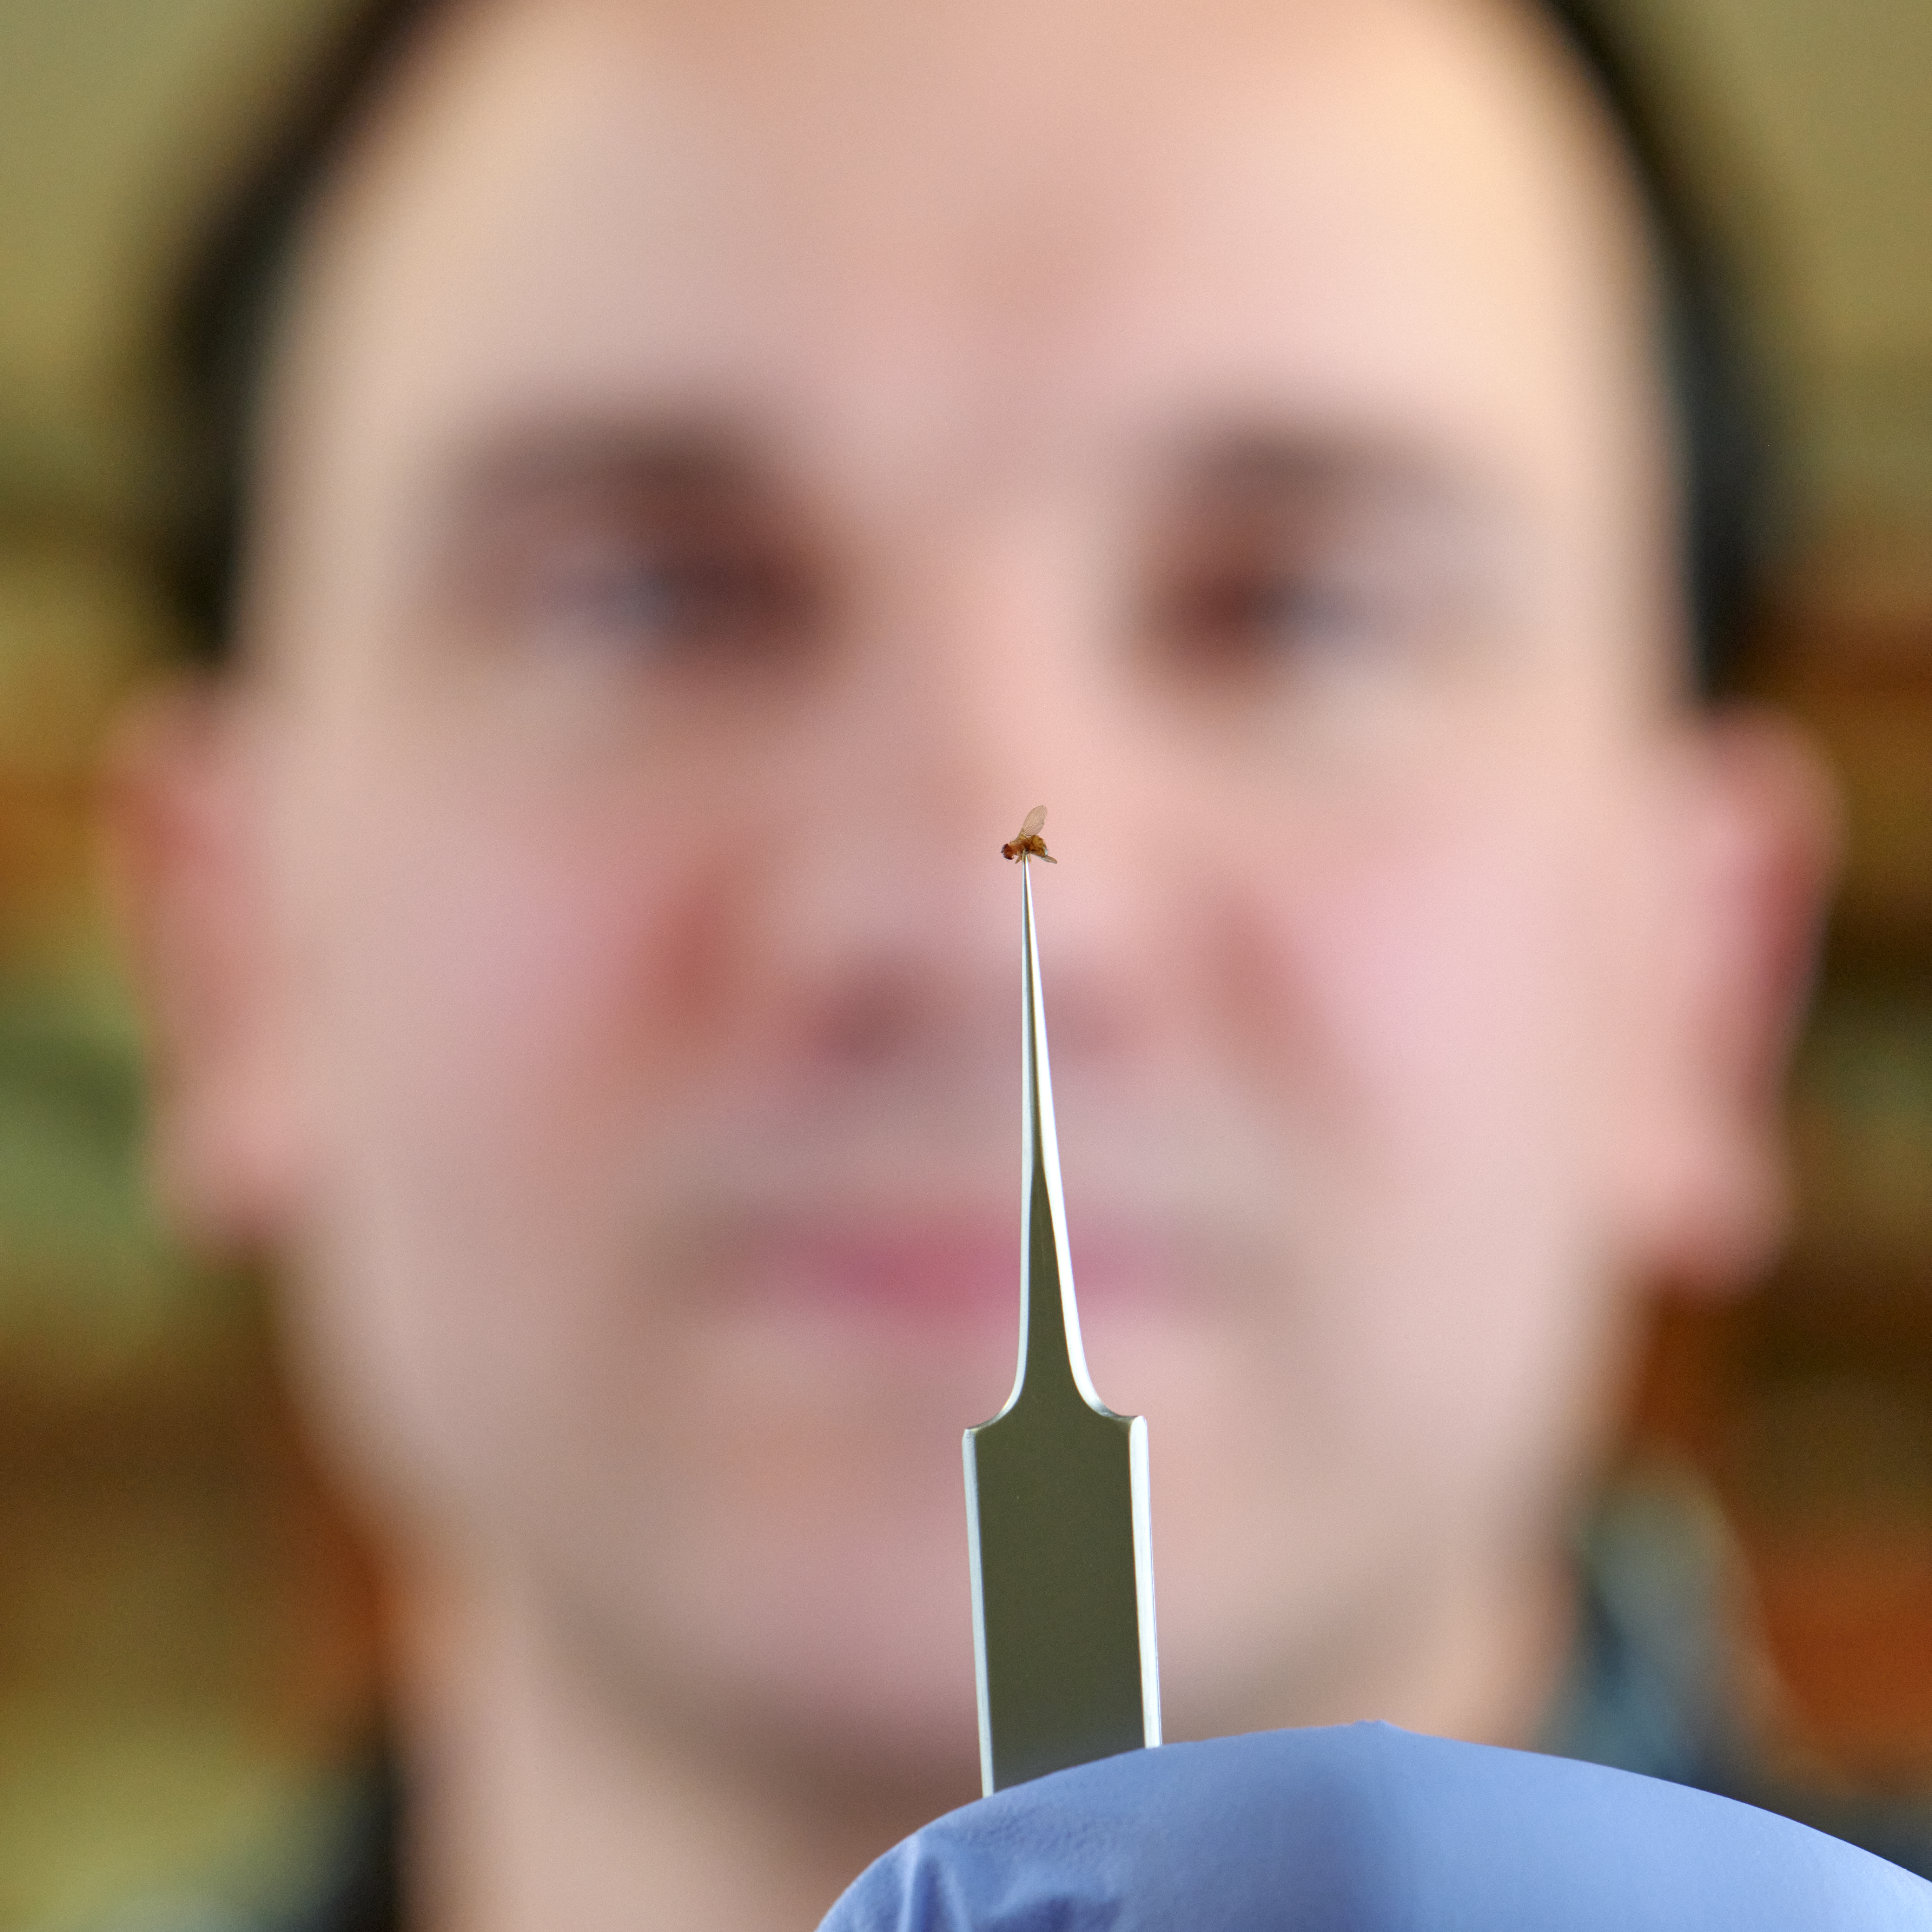 Jeff Divino holds a tiny fruit fly up via tweezers